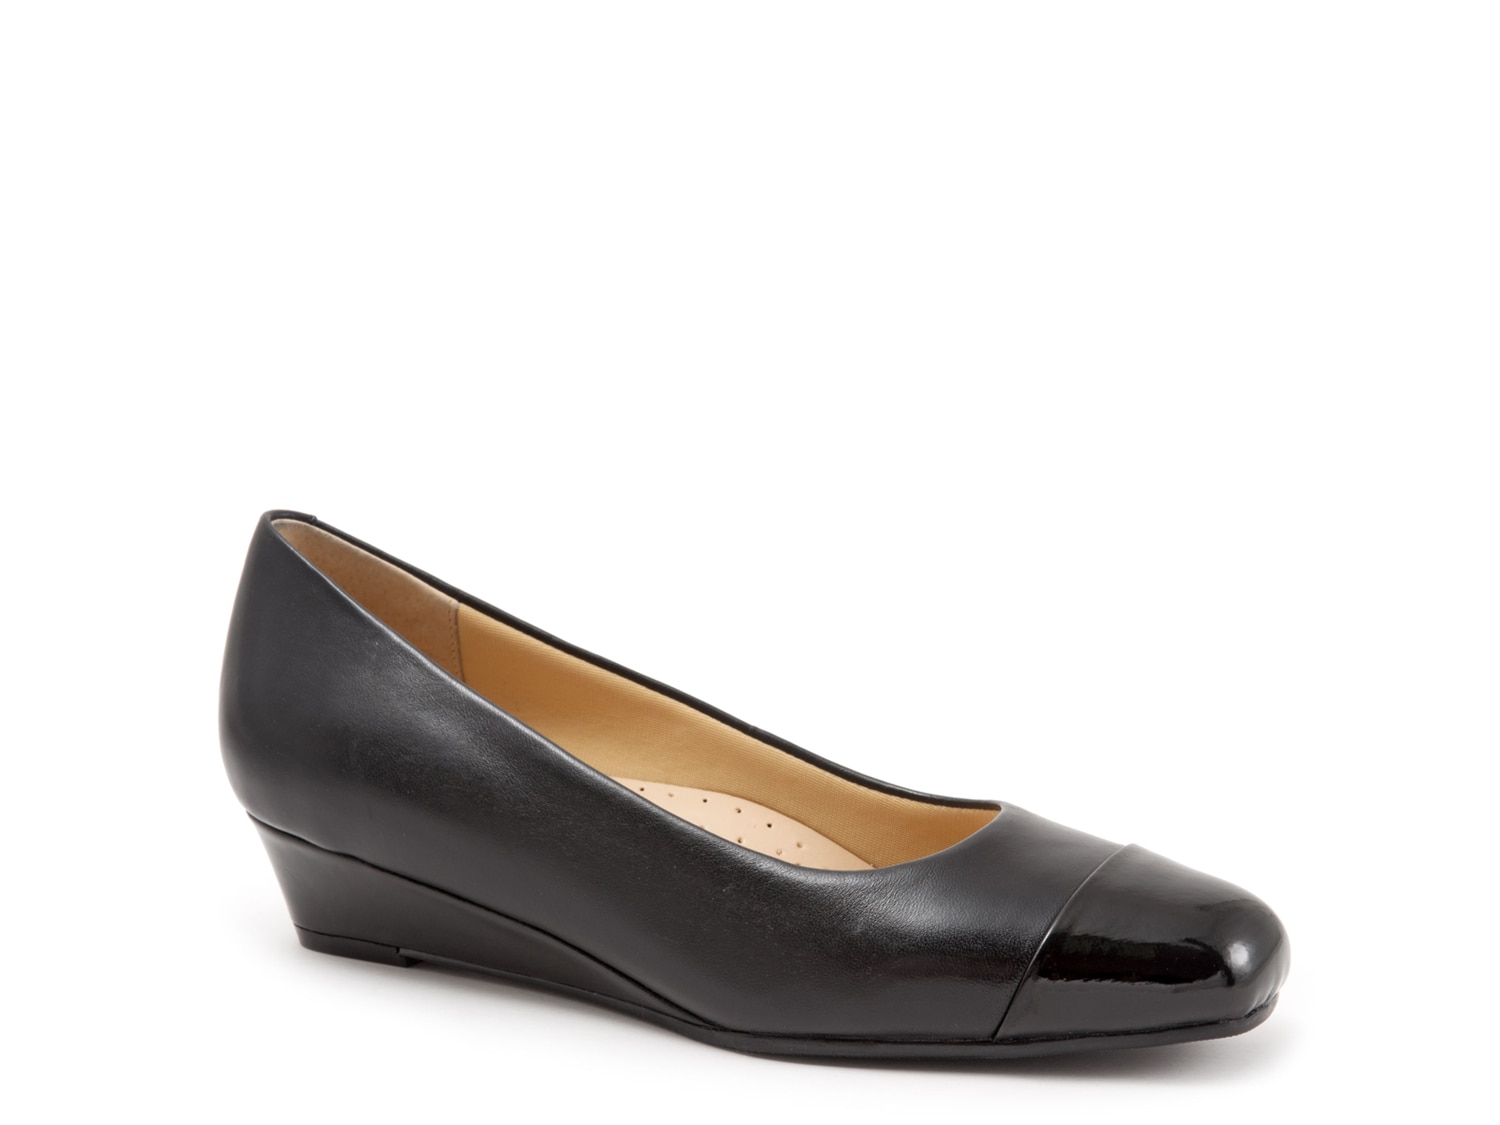 Trotters Langley Wedge Pump Women's Shoes | DSW